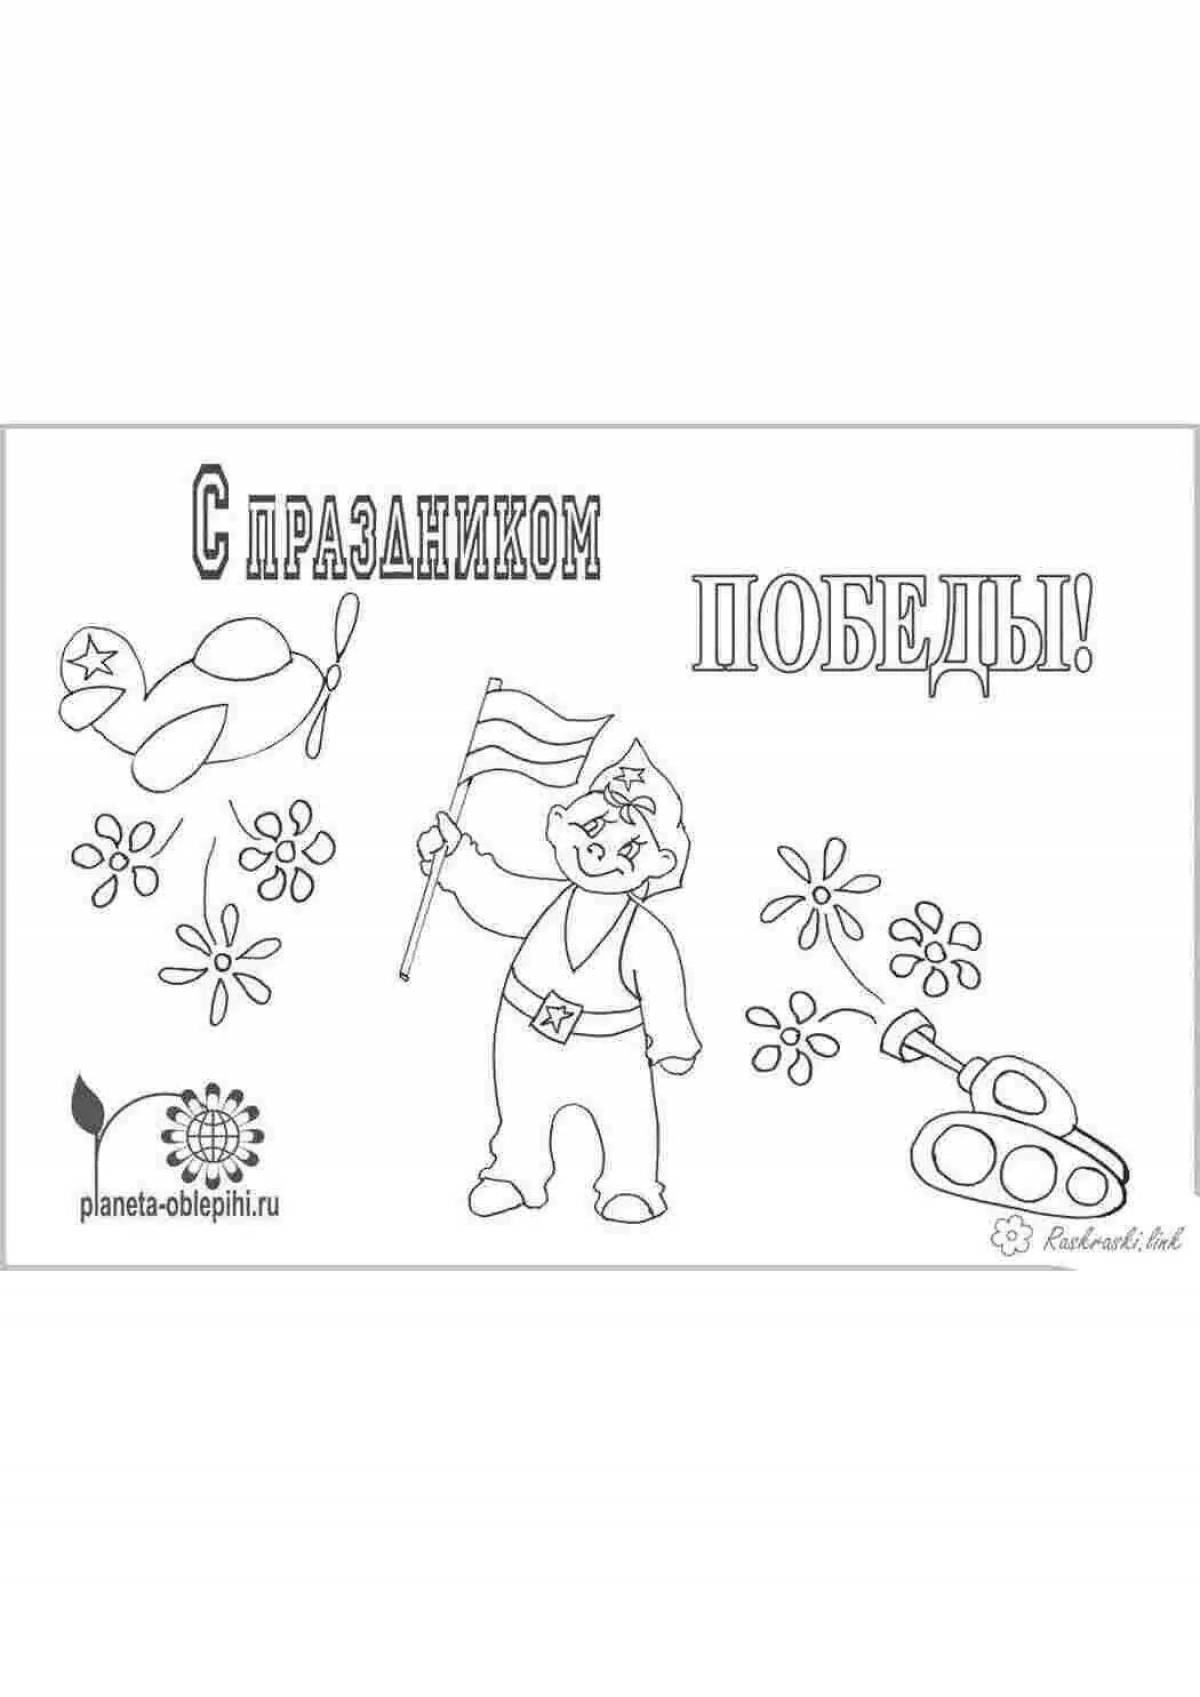 Jovial February 23 coloring page